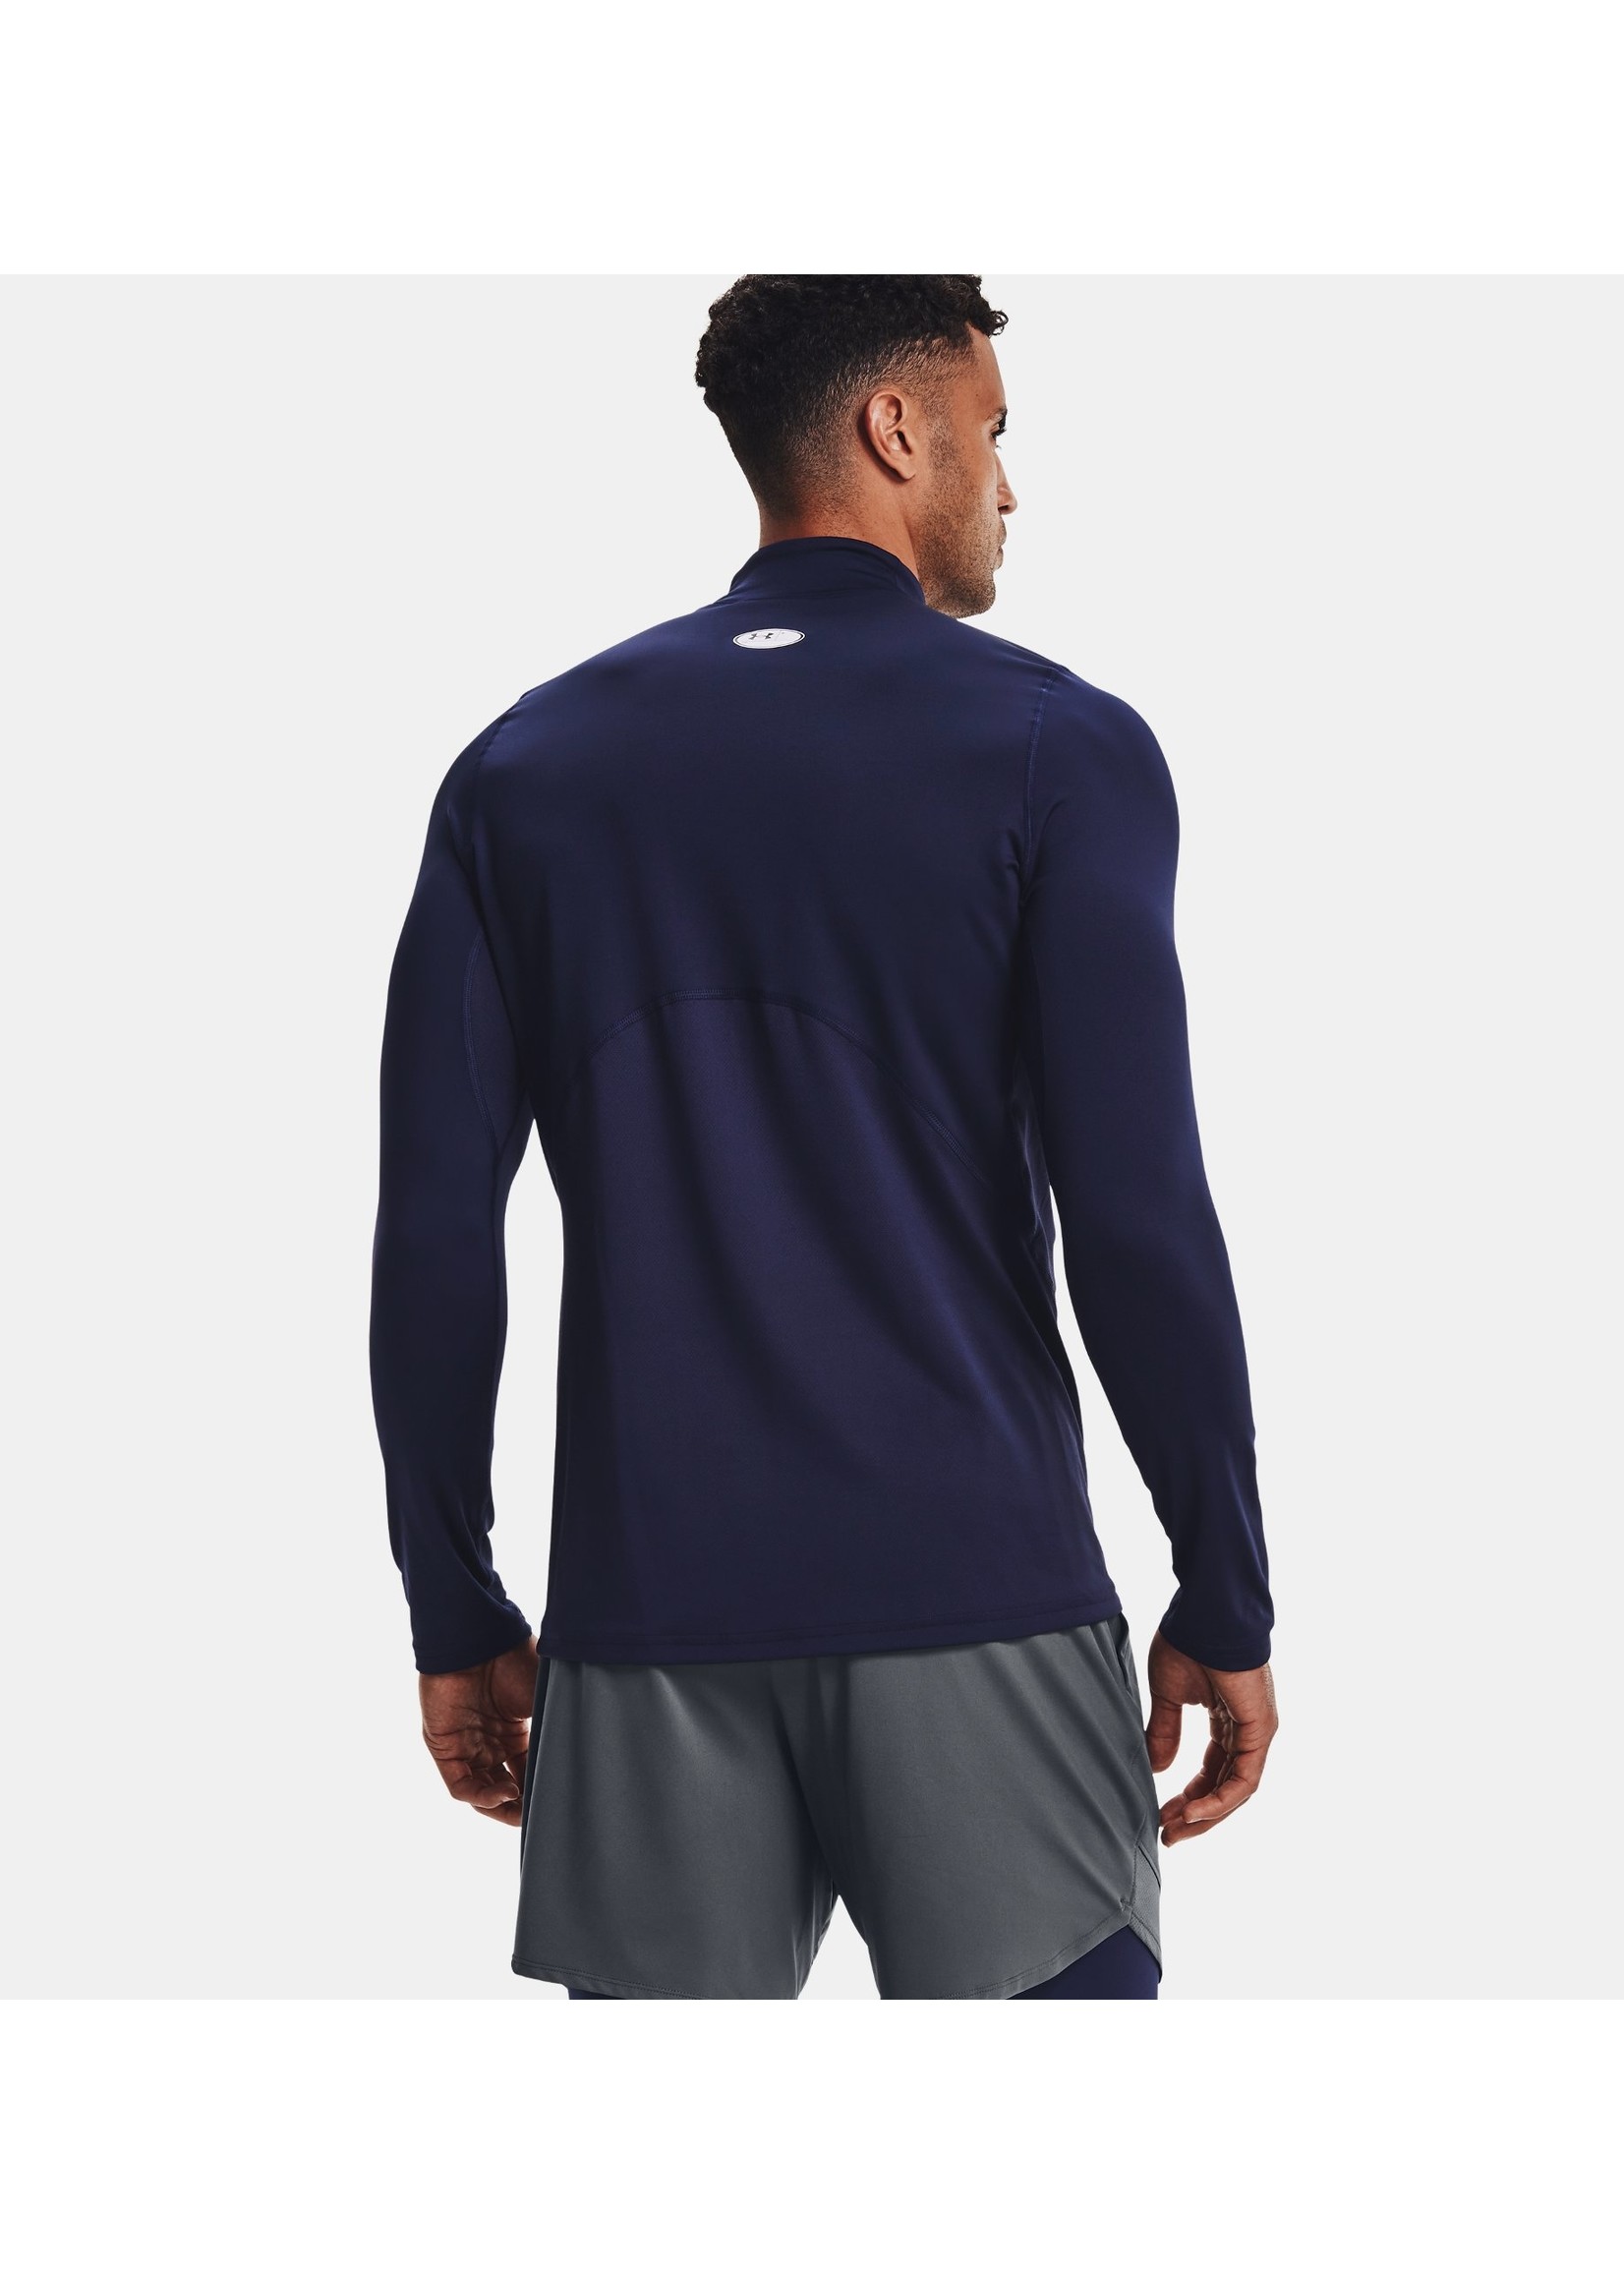 UNDER ARMOUR Men's ColdGear® Fitted Mock